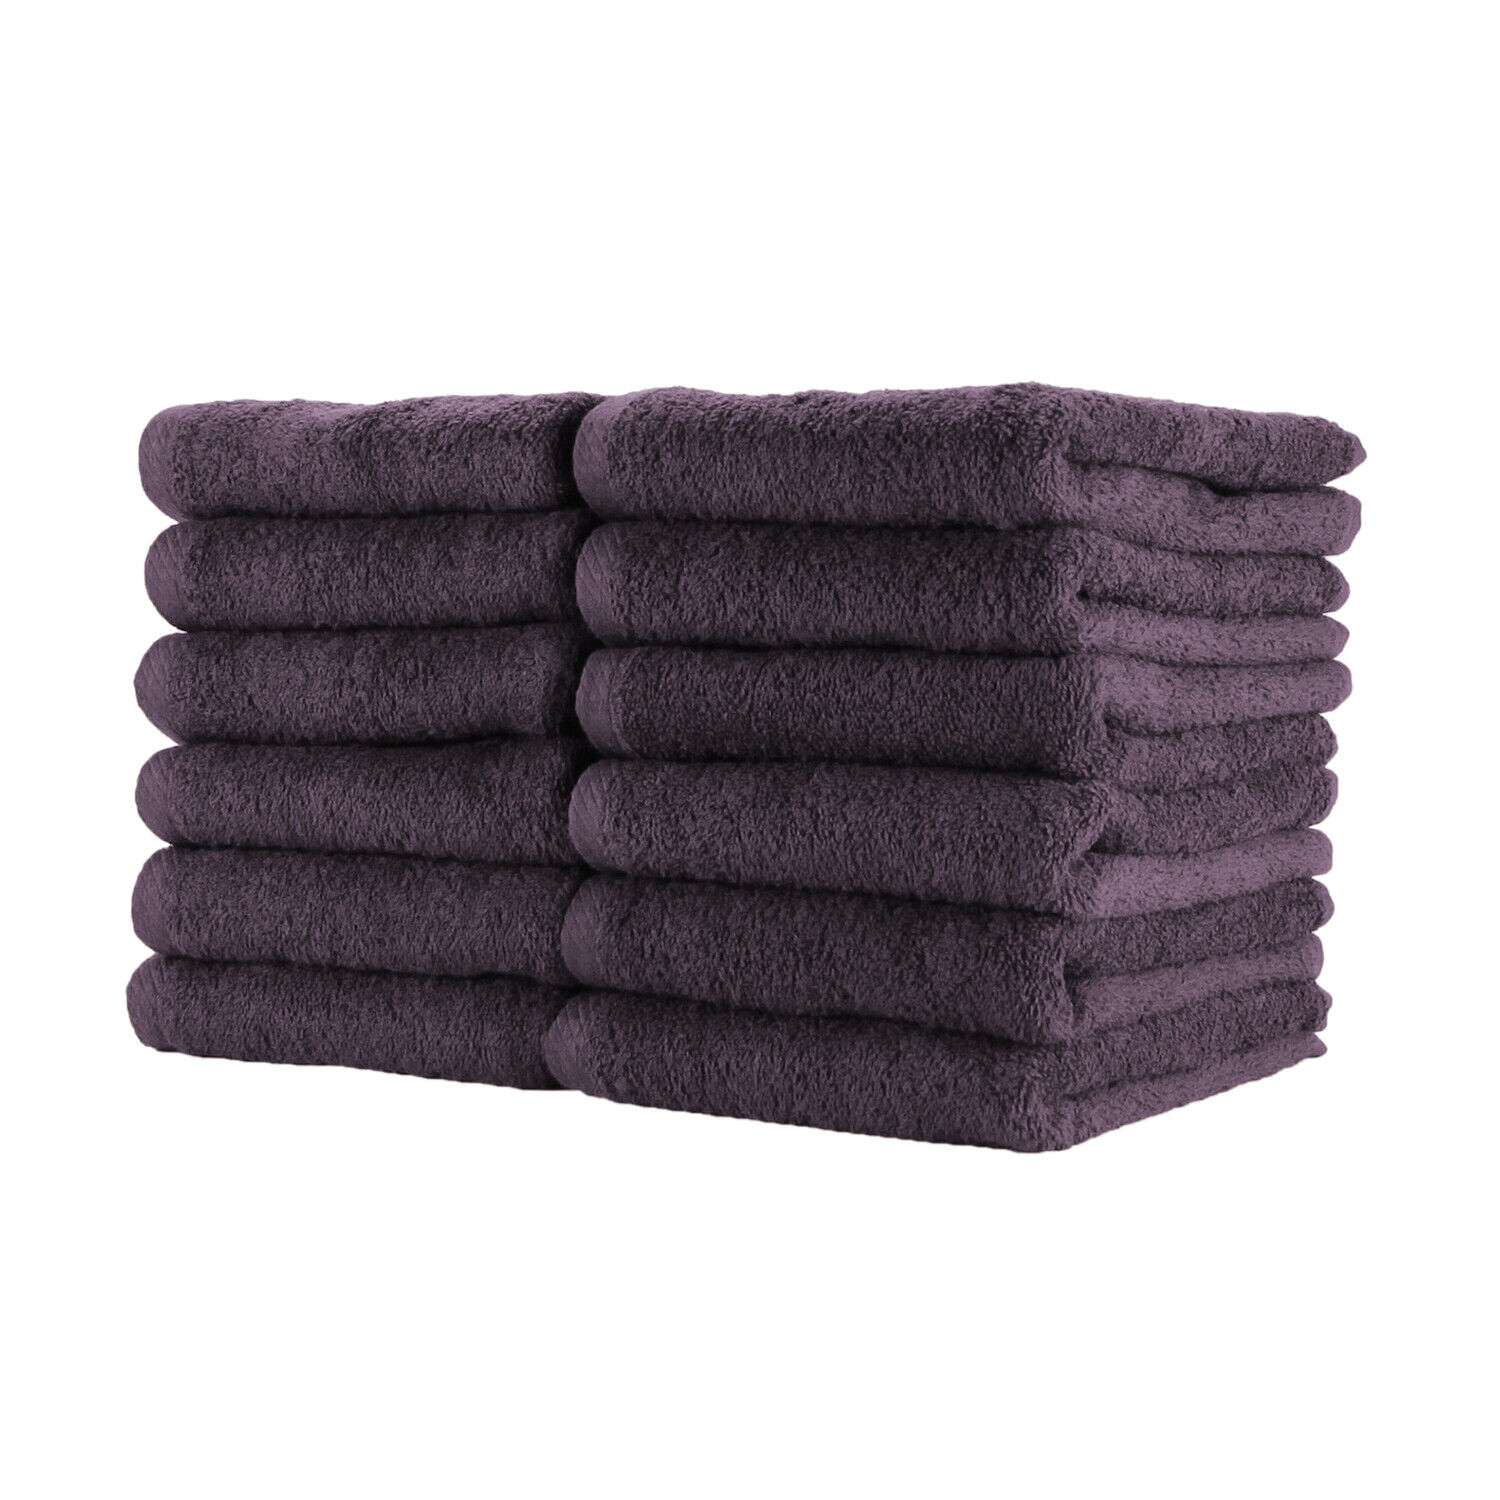 Salon Towels - Packs of 12 - Bleach Safe 16 x 27 Cotton Towel - Color Options  Arkwright Does Not Apply - фотография #12